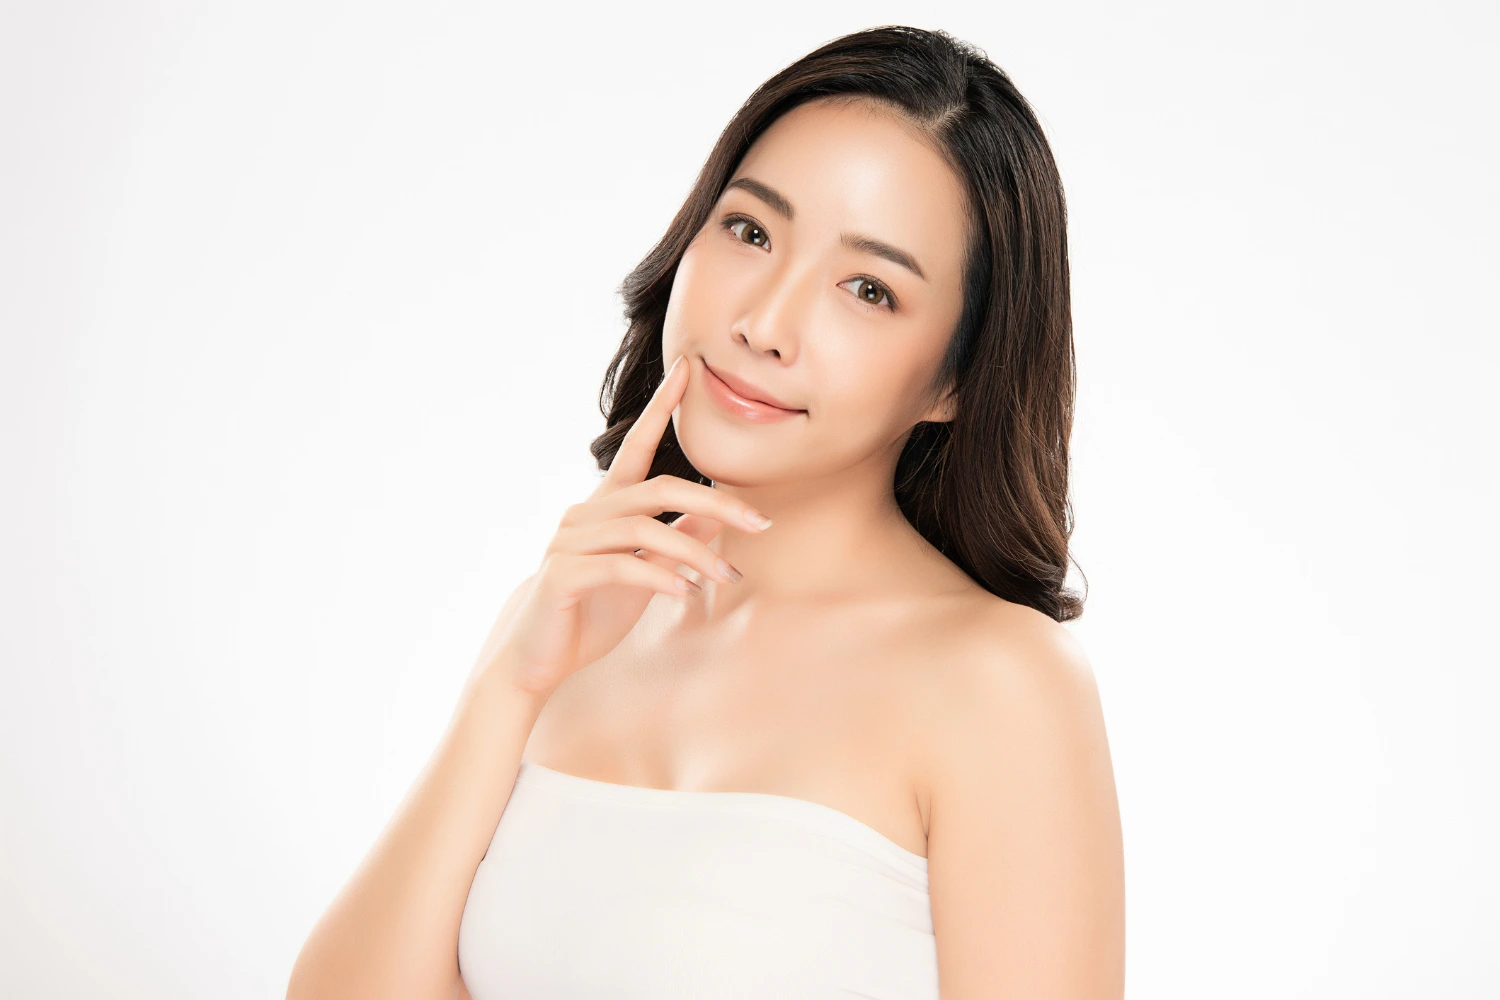 Lady with smooth and beautiful complexion after undergoing Fractional CO2 Laser treatment.